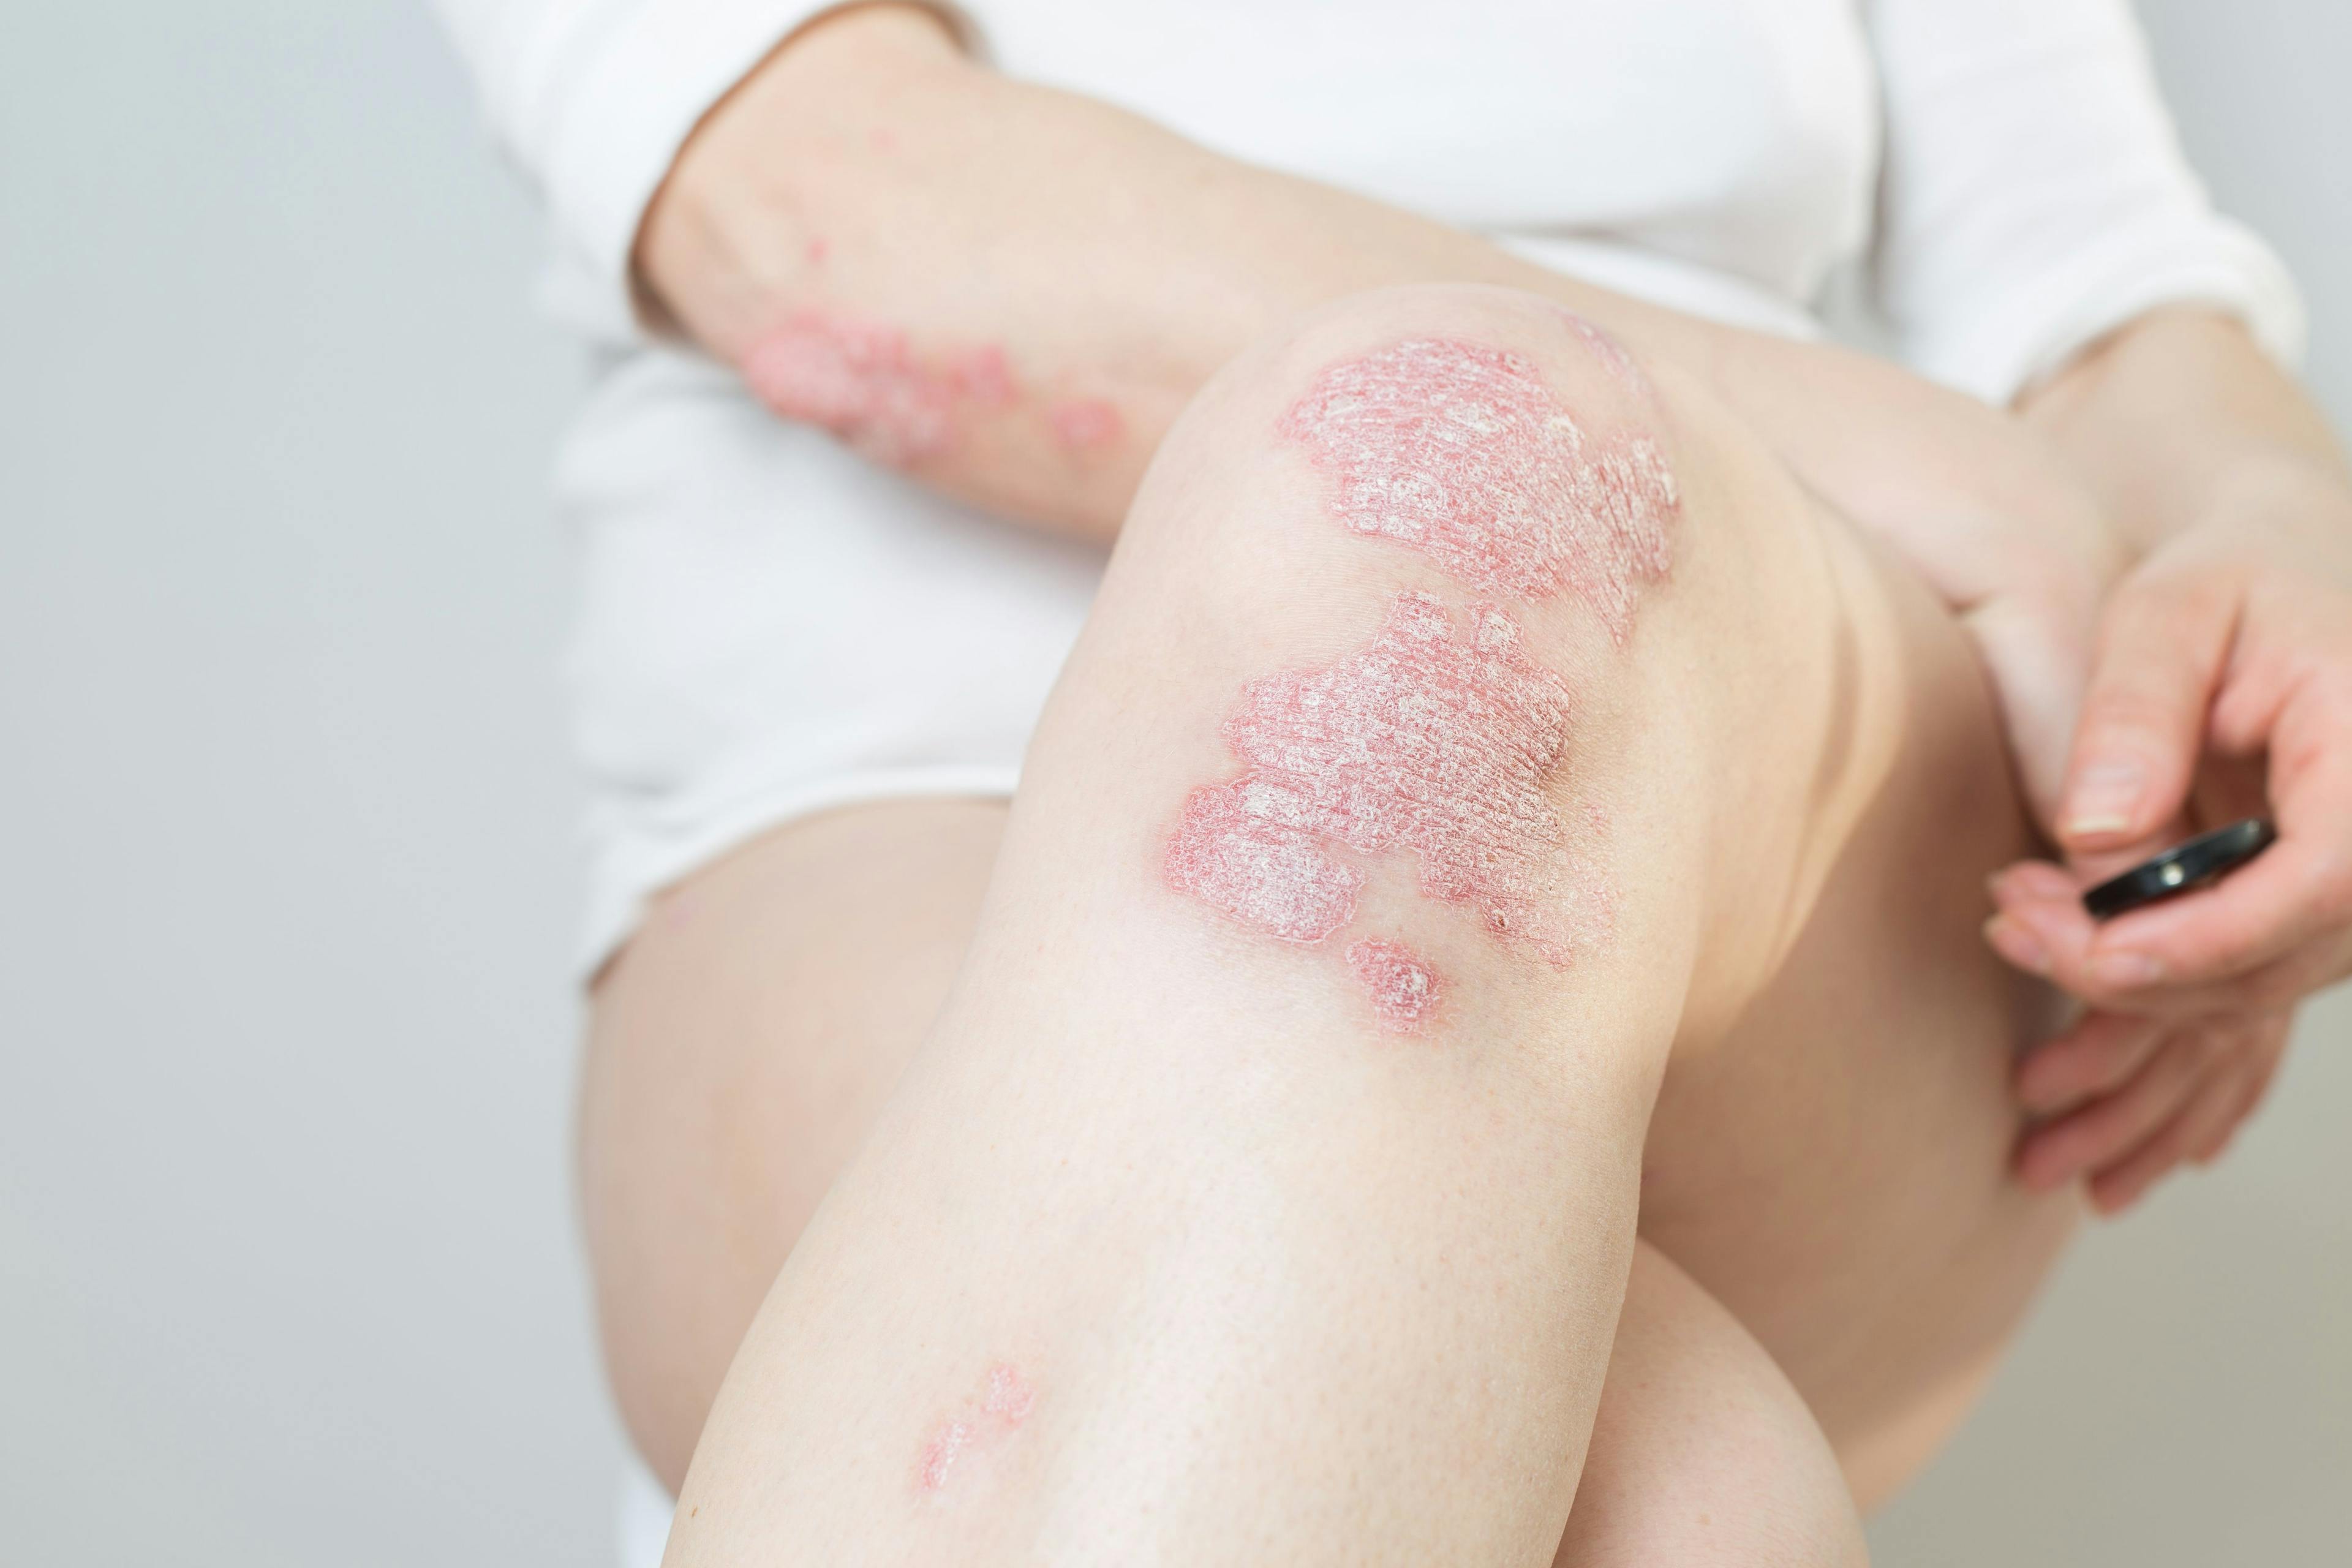 Acute psoriasis on the knees, body, elbows | Image Credit: SNAB - stock.adobe.com